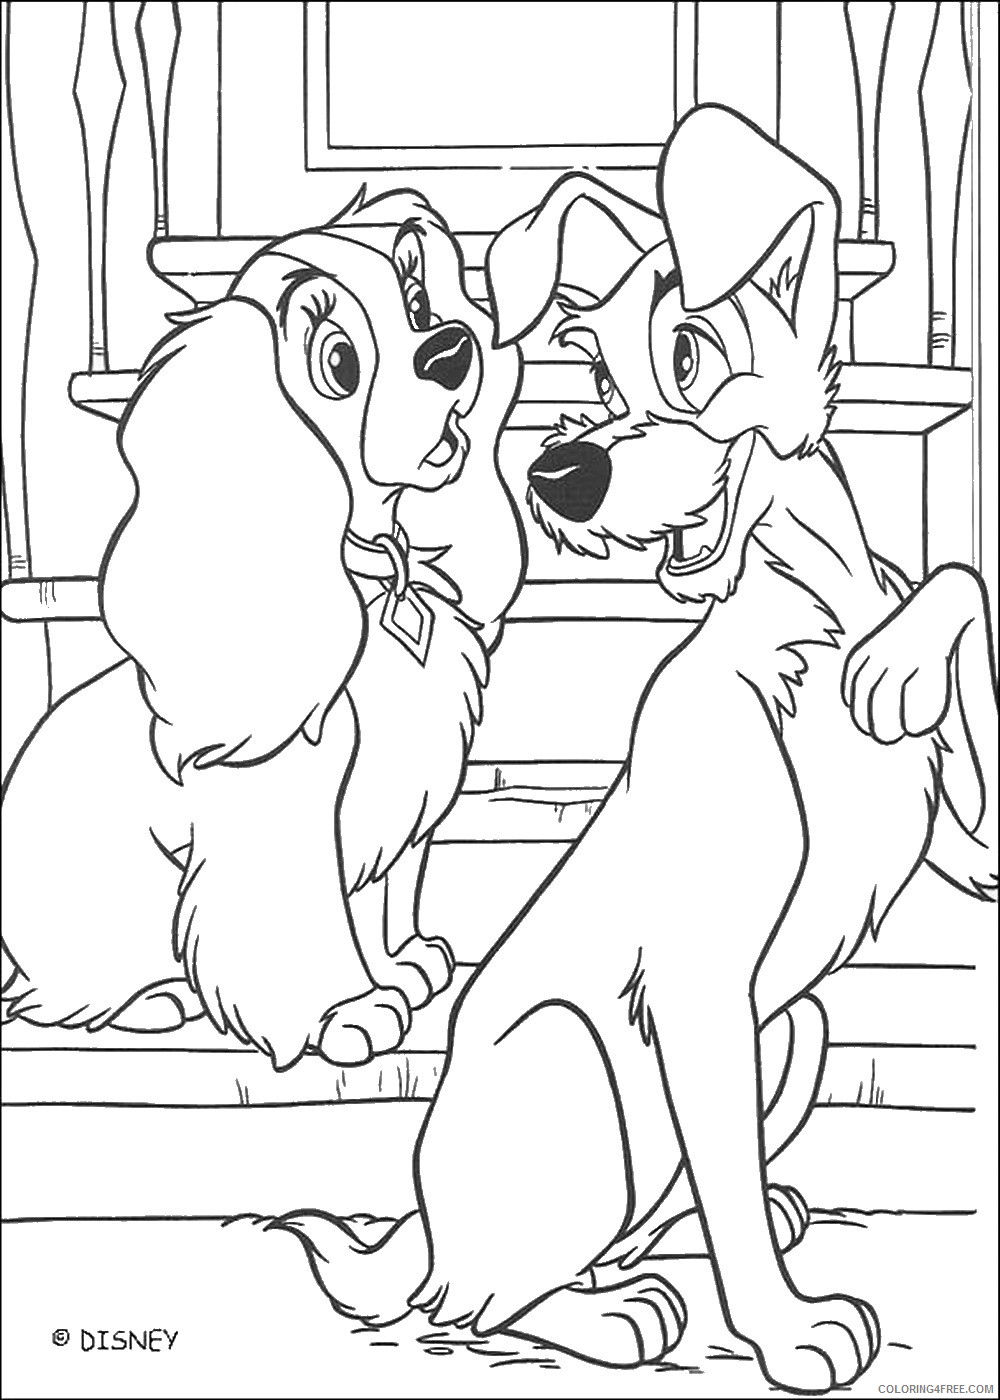 Lady and the Tramp Coloring Pages Cartoons lady tramp_cl07 Printable 2020 3607 Coloring4free